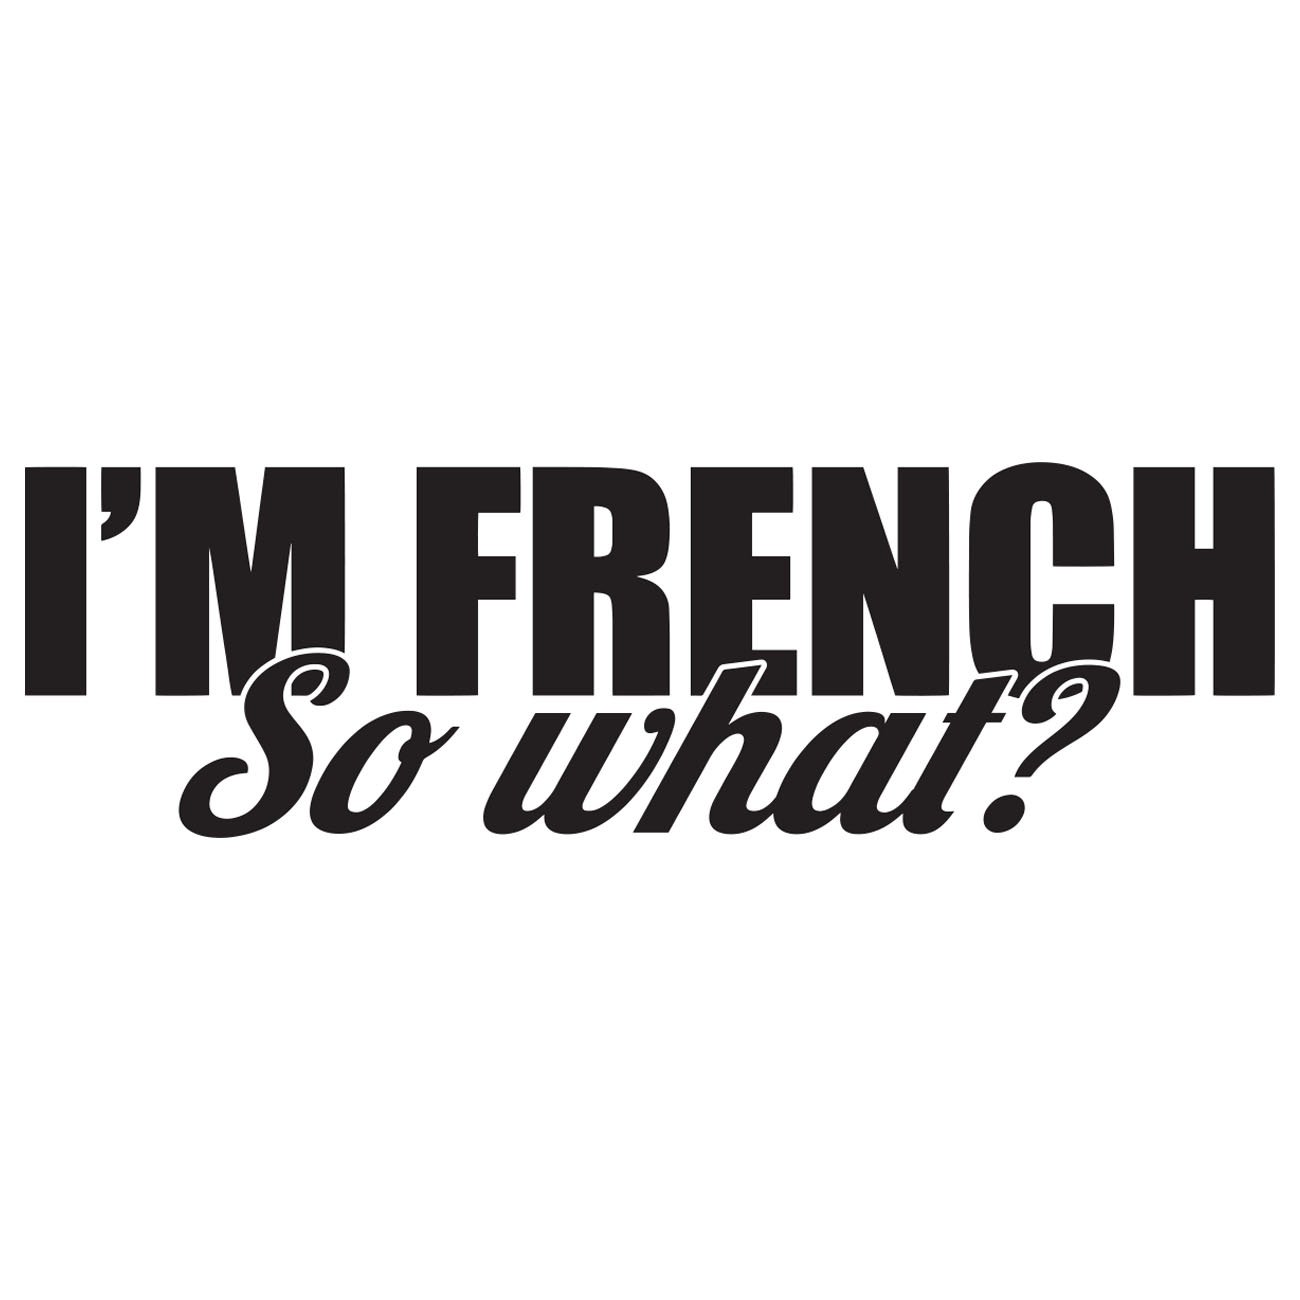 Im french so what